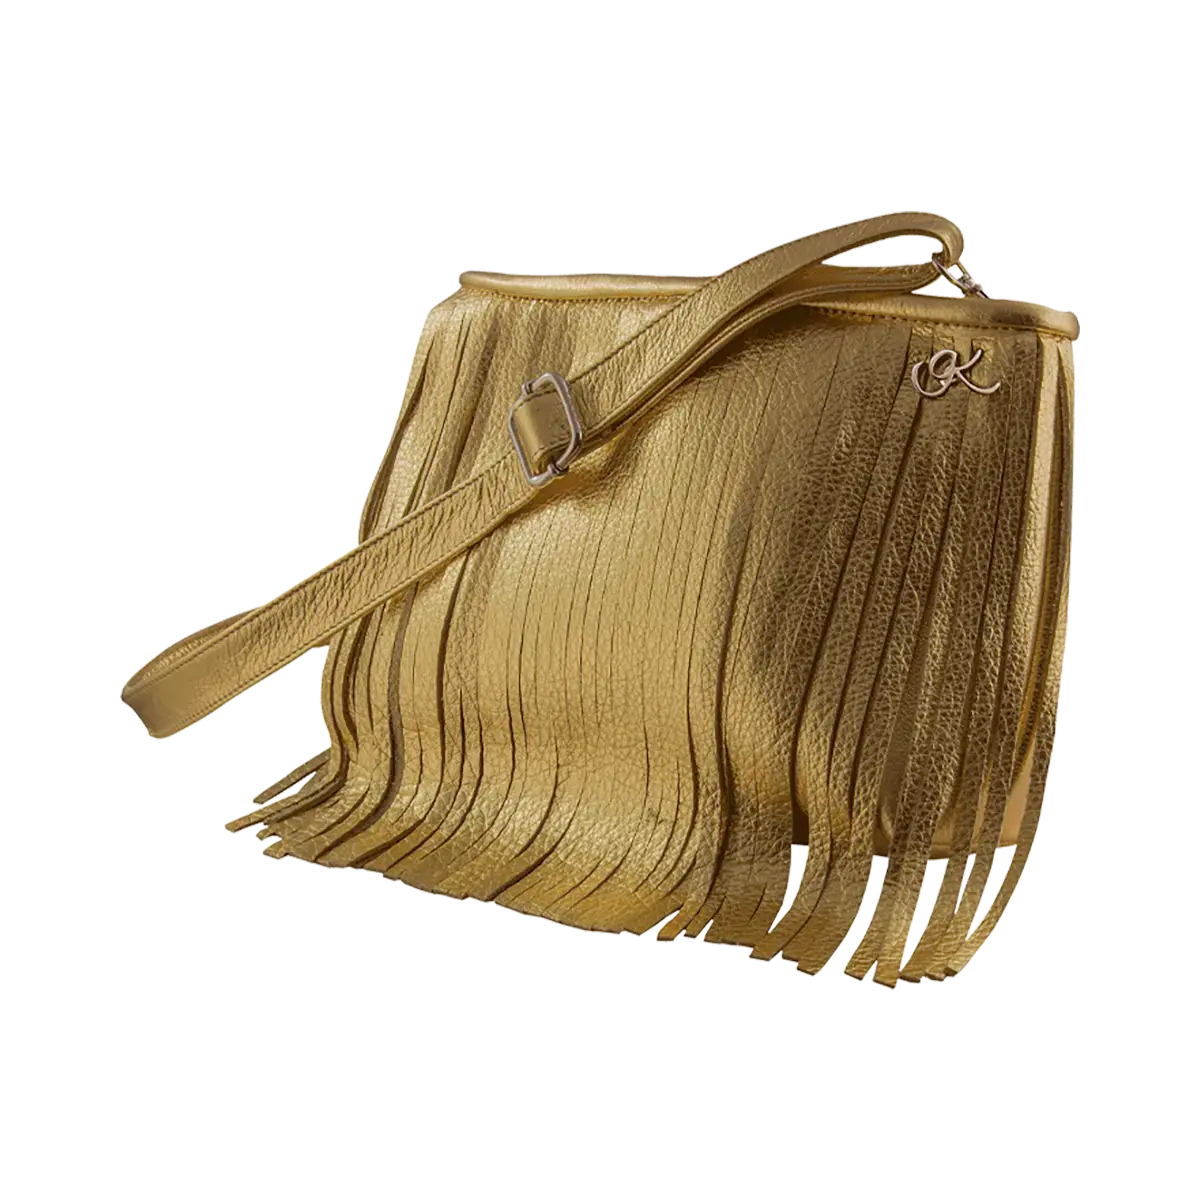 gold small black leather crossbody bag with fringe. Fashion accessory for women in San Diego, CA.